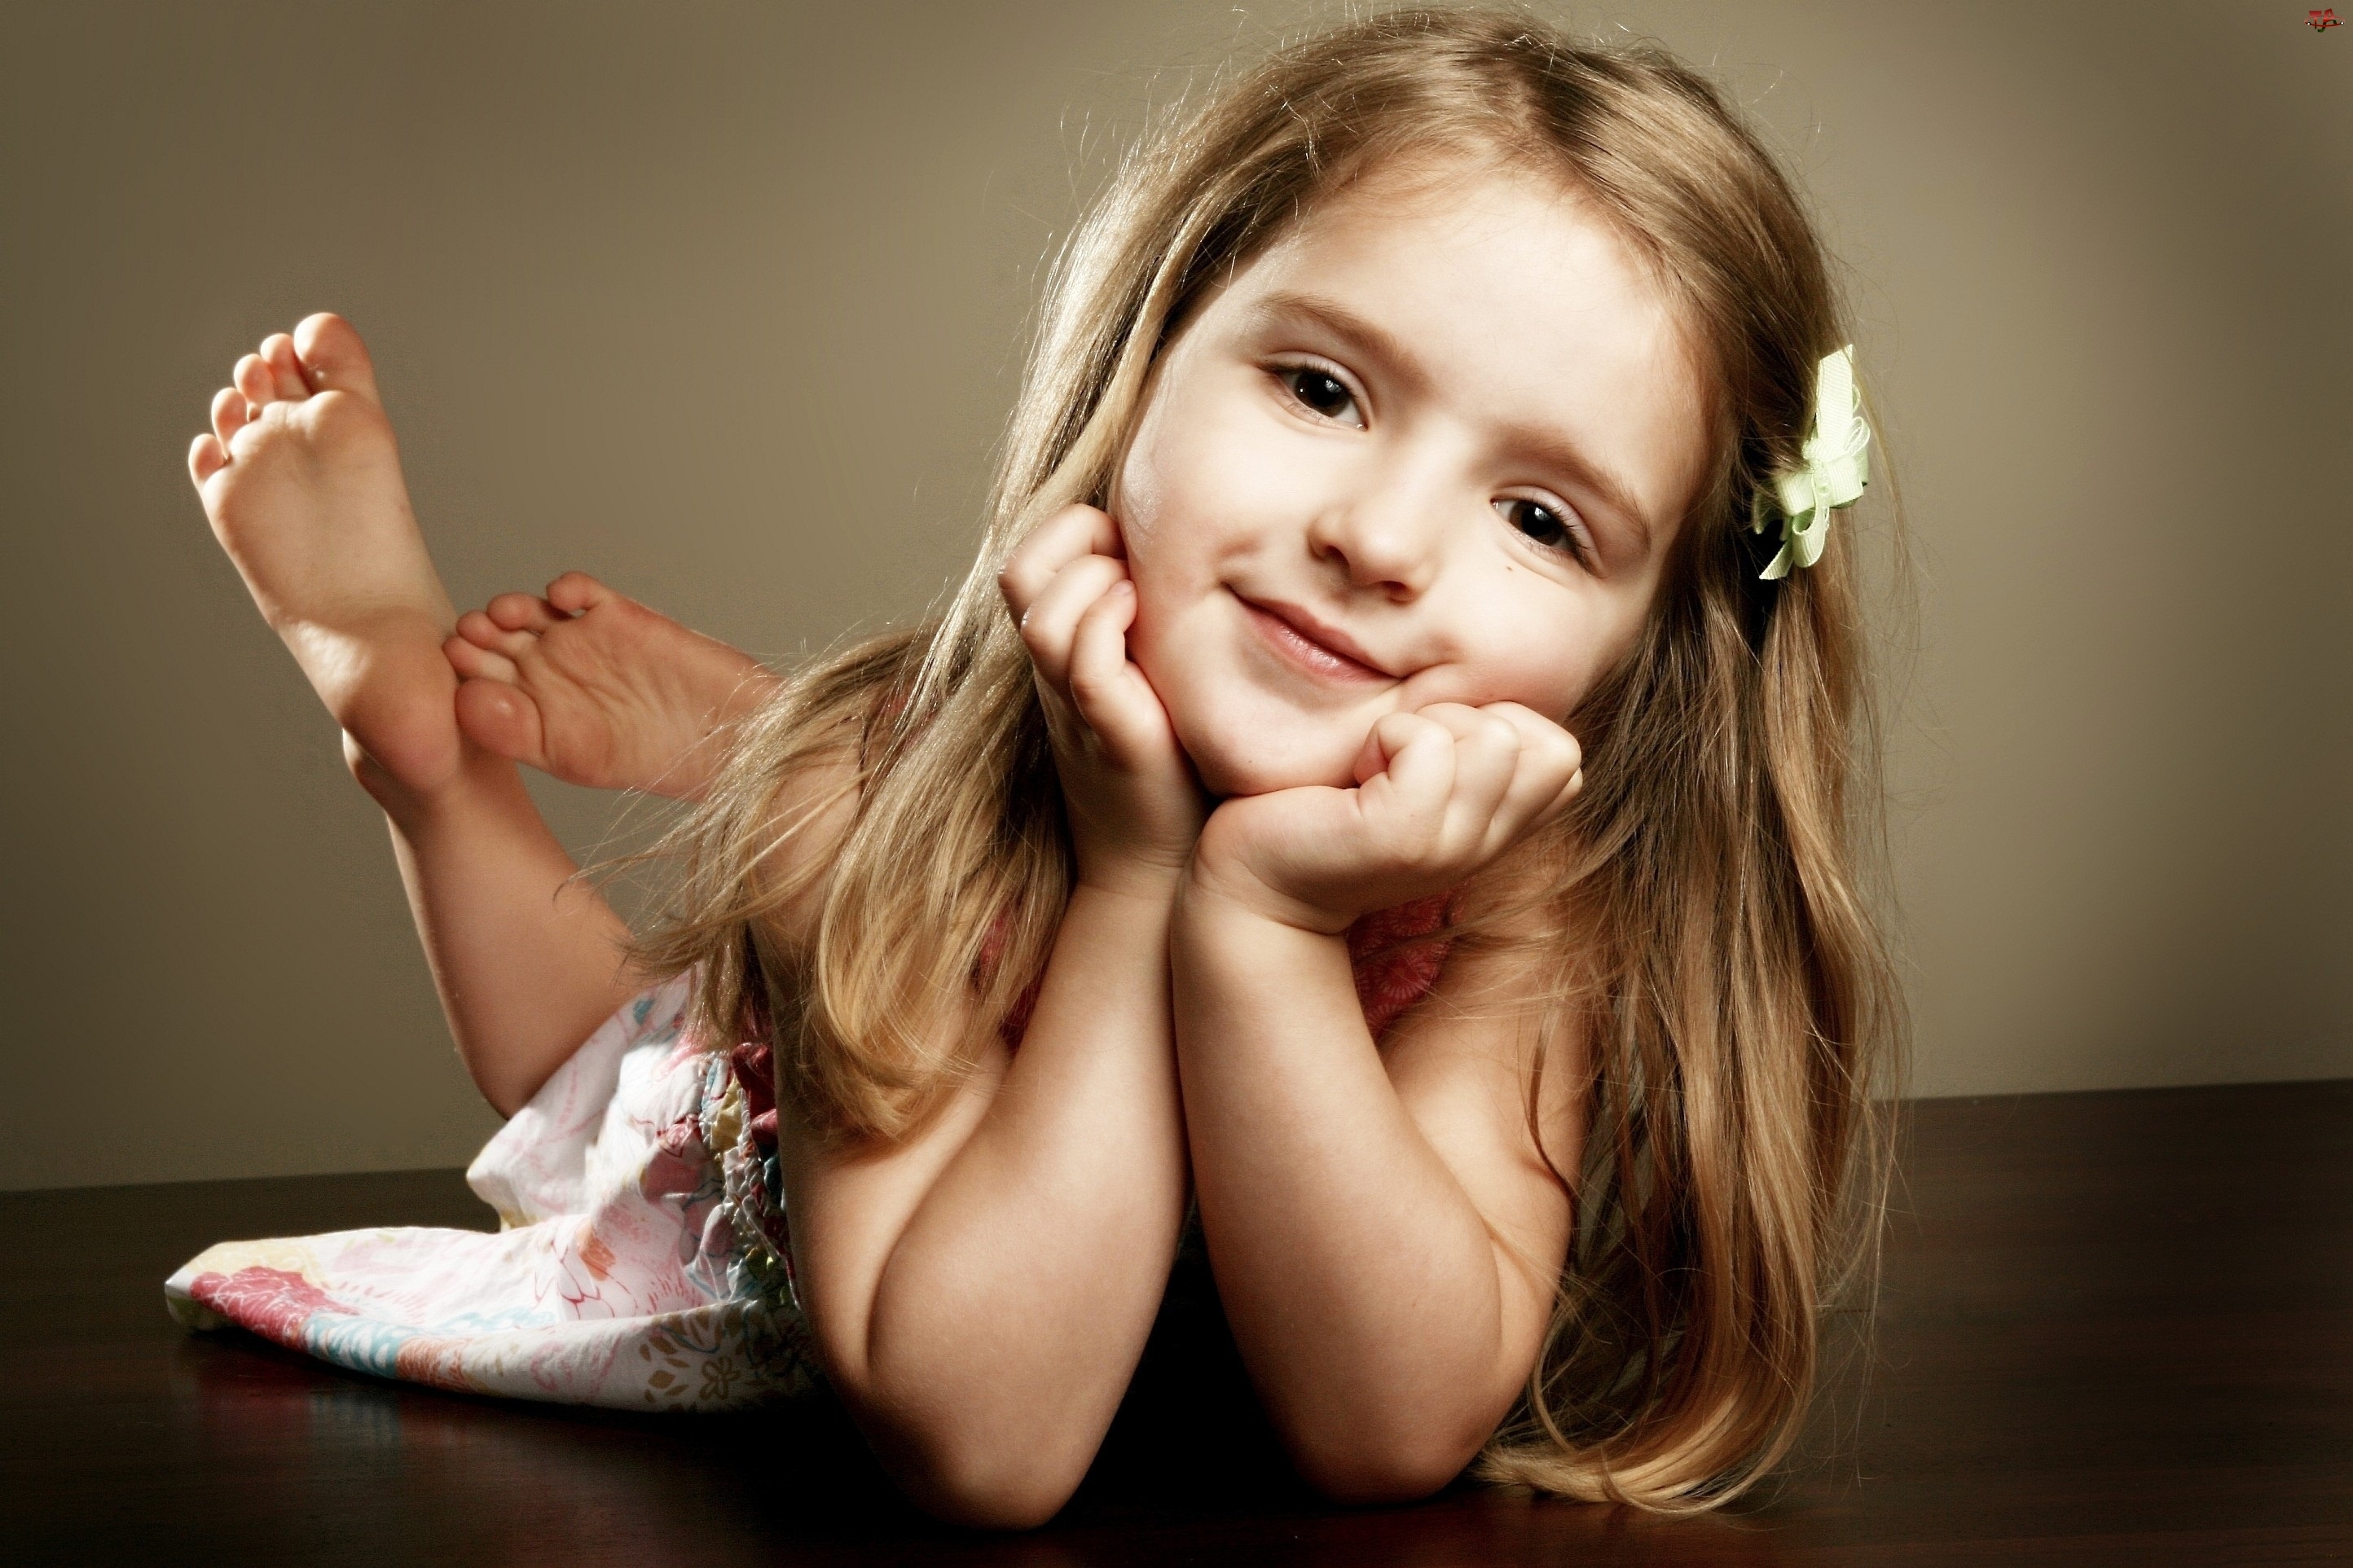 Cute Little Girl Image - ID: 311747 - Image Abyss.